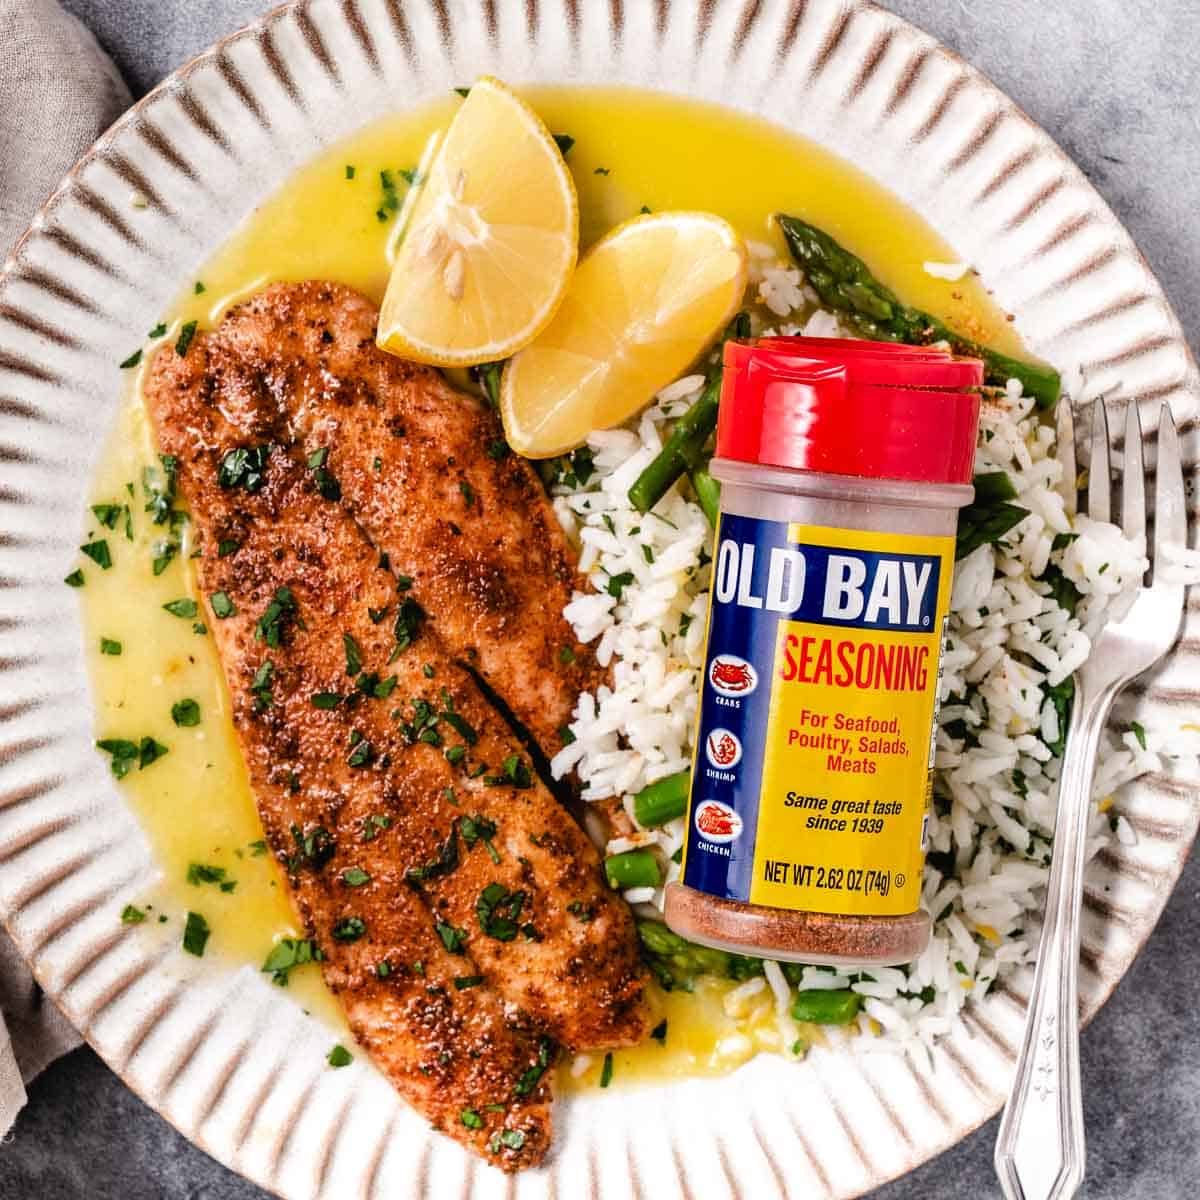 Yellowtail snapper with Old Bay seasoning.